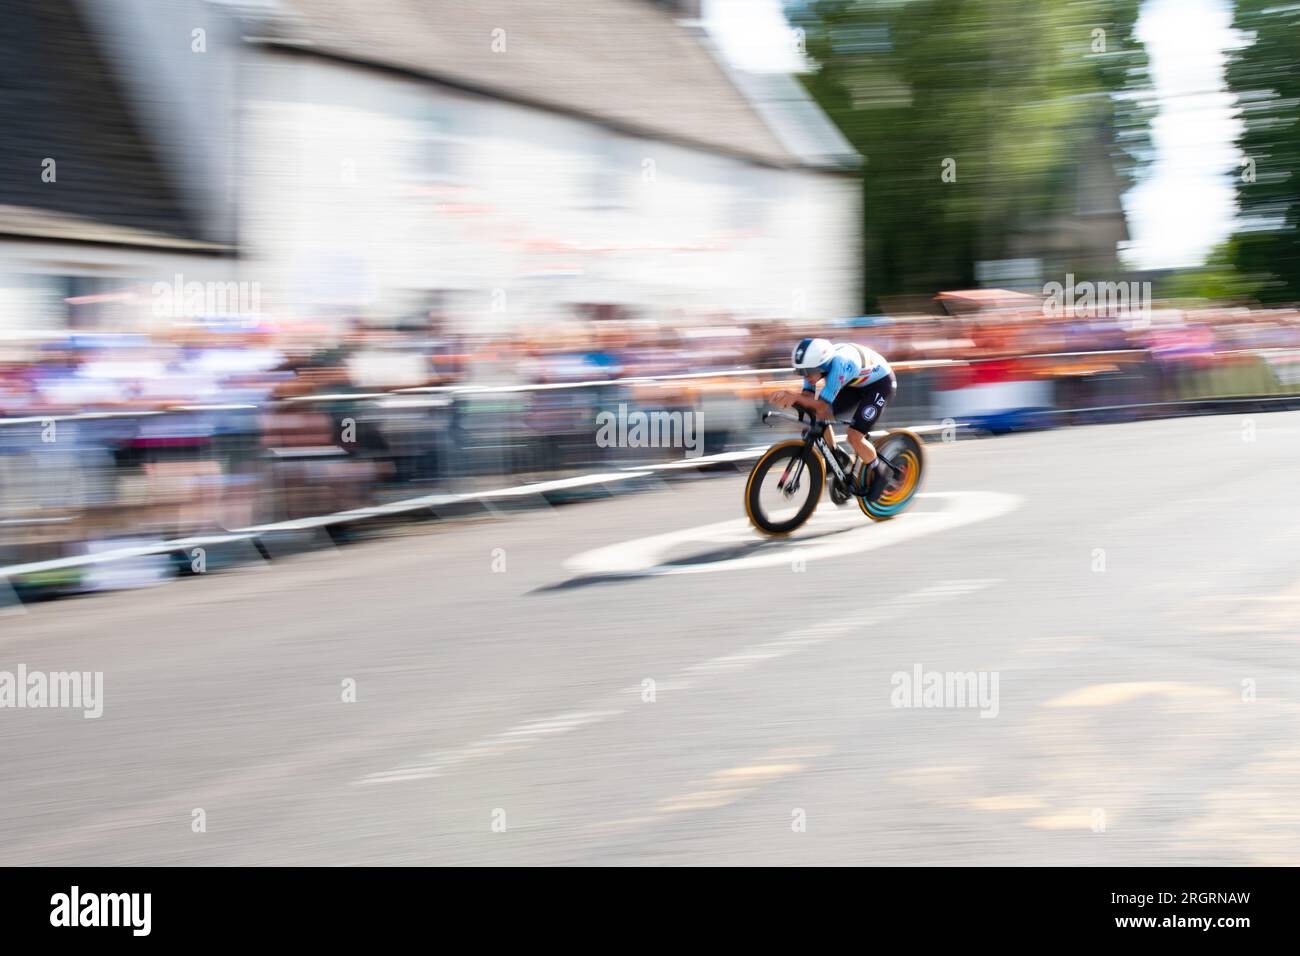 Cycling World Championships Glasgow 2023 - Kippen, Stirling, Scotland, UK - Belgian Remco Evenepoel the winner of the Mens Elite Individual Time Trial racing through the Stirling village of Kippen on his way to becoming the youngest ever elite men's time trial world champion at 23 Credit: Kay Roxby/Alamy Live News Stock Photo